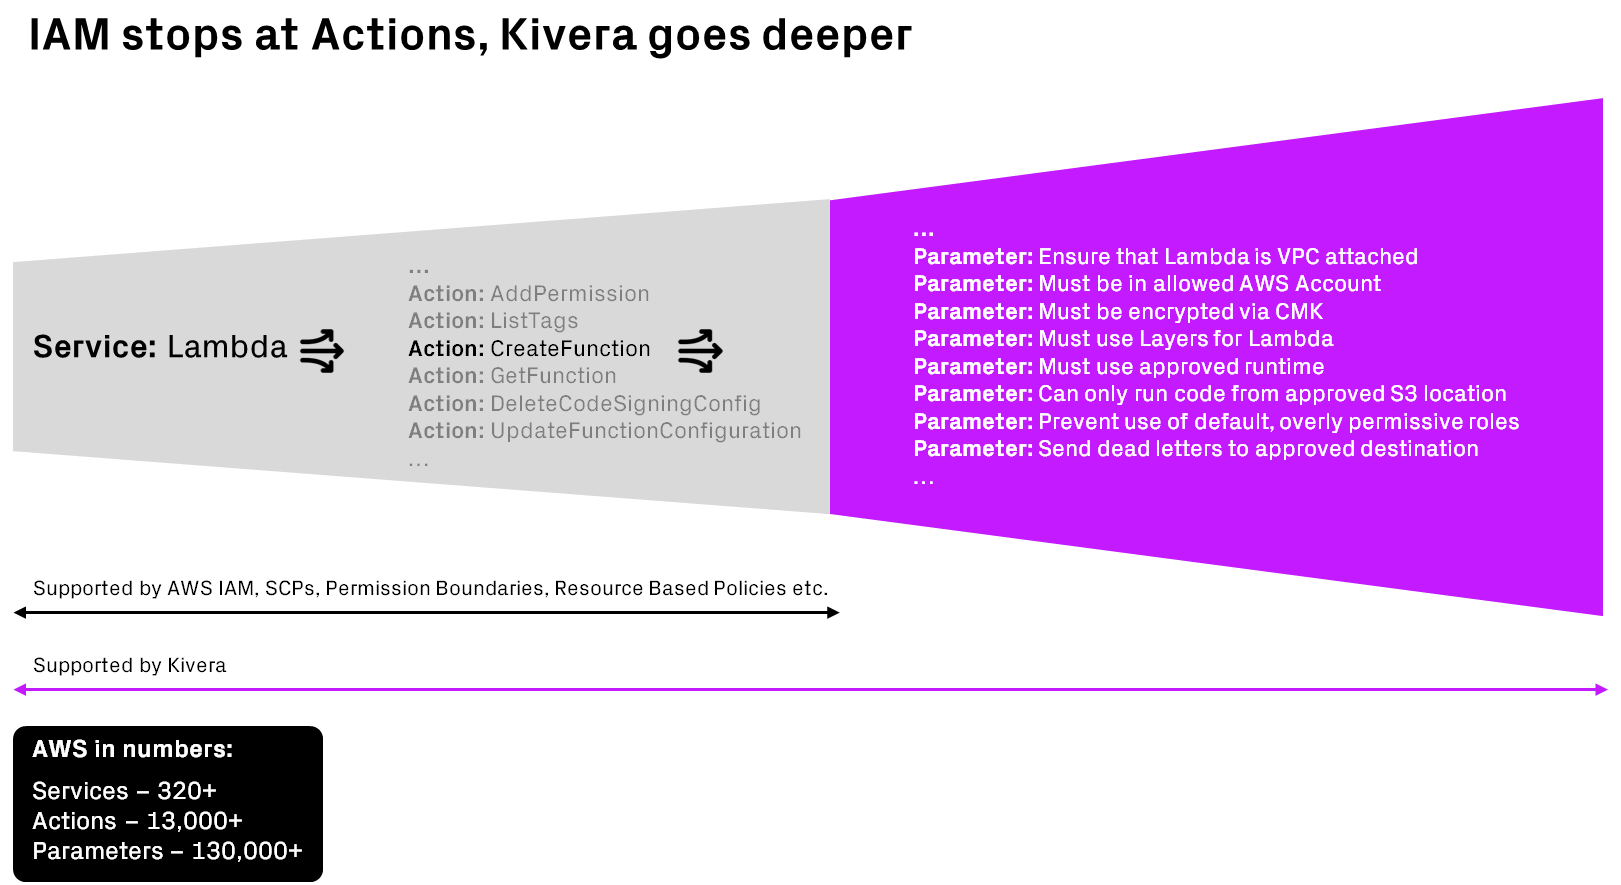 Fig 1. Comparison of Services, Actions and Parameters in AWS